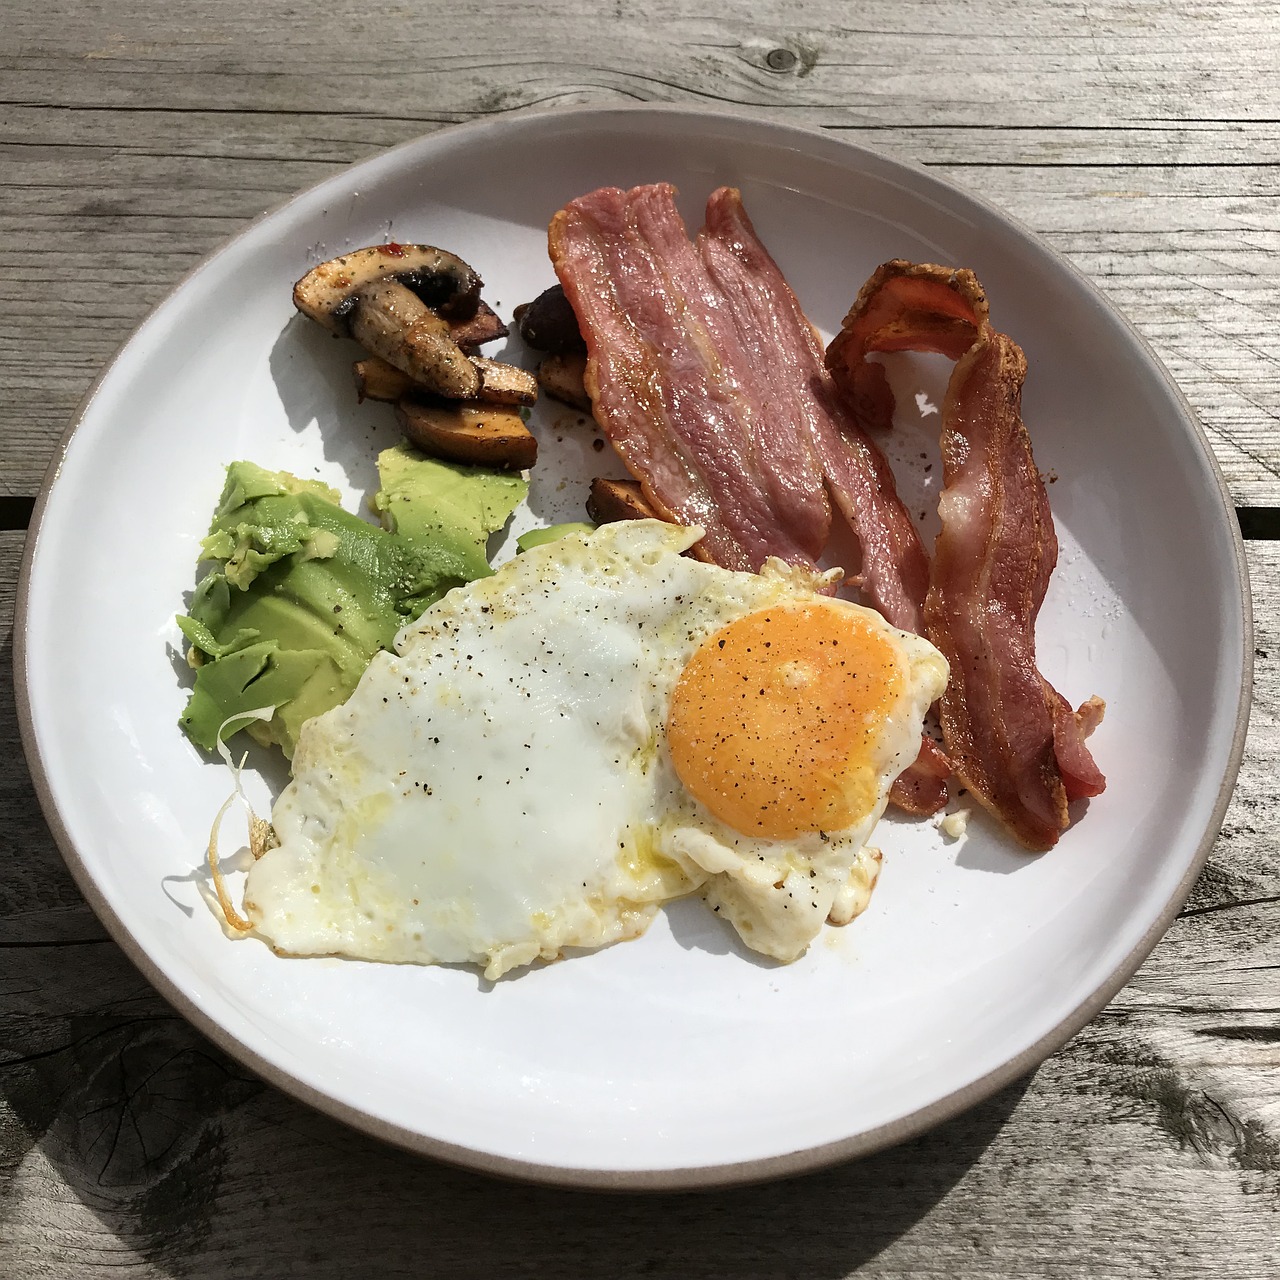 Check Your Keto Diet Understanding With This Engaging Quiz